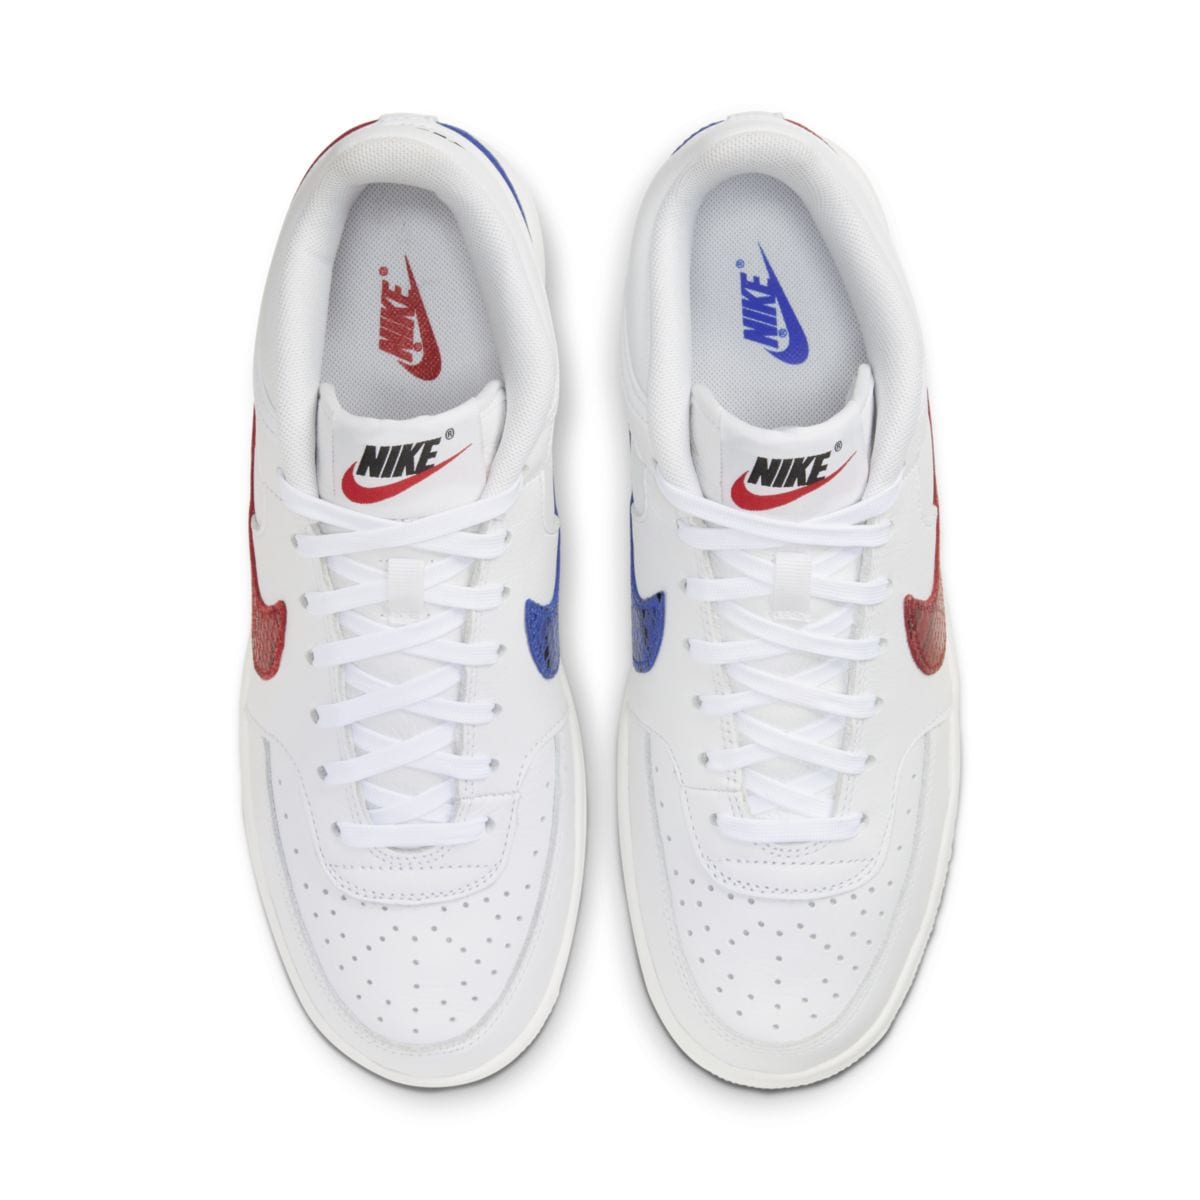 Nike Sky Force 3 4 White University Red Blue CW7074-100 3